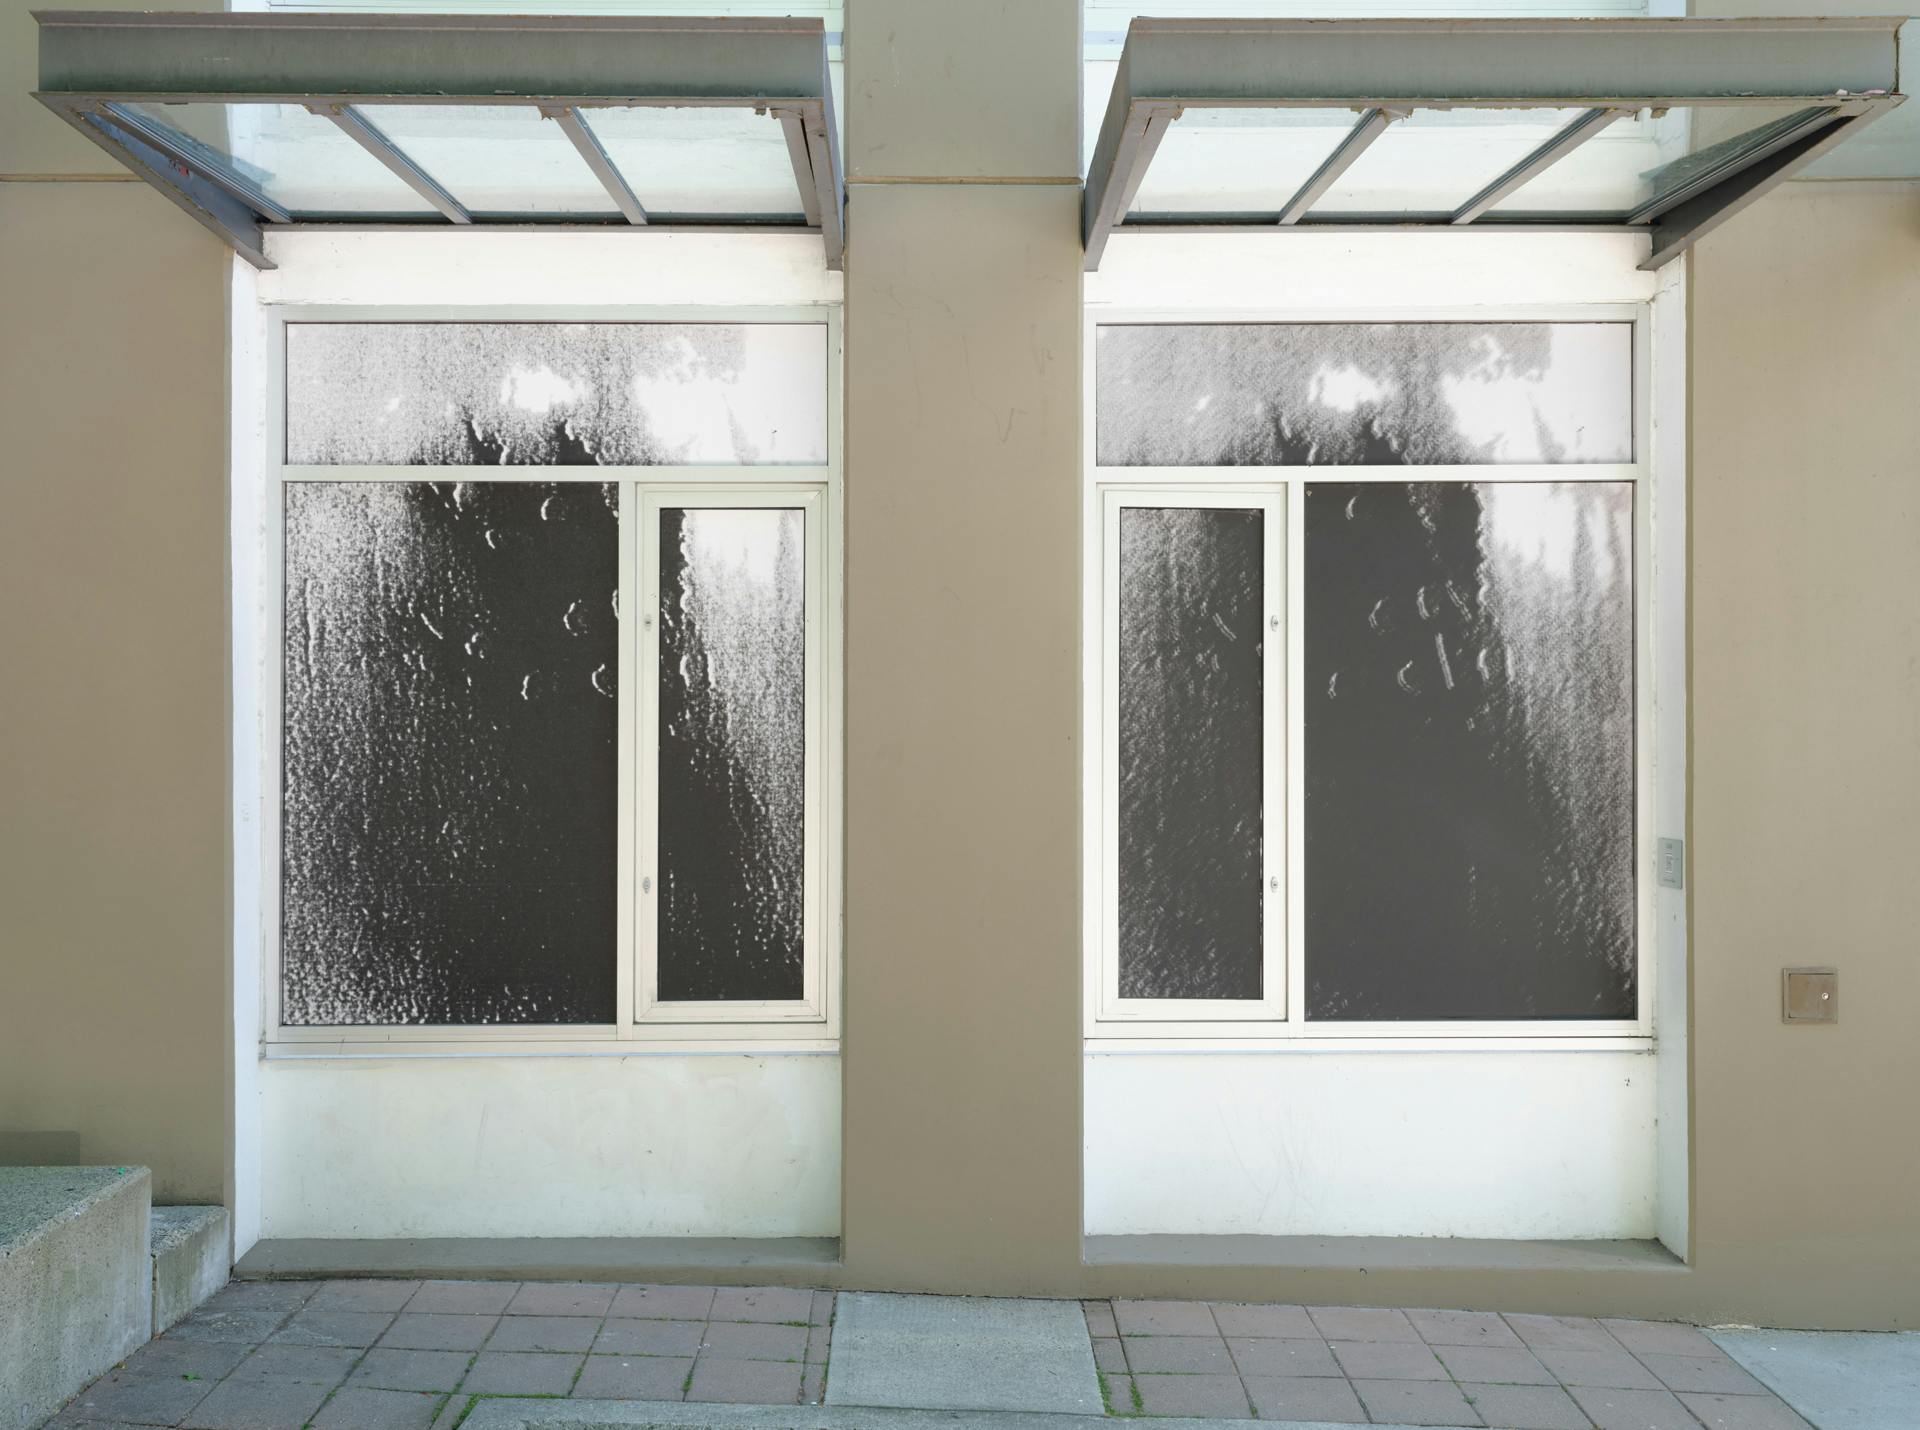 A pair of windows featuring what look like black smudges or shadows. The right image is slightly darker than the left one.